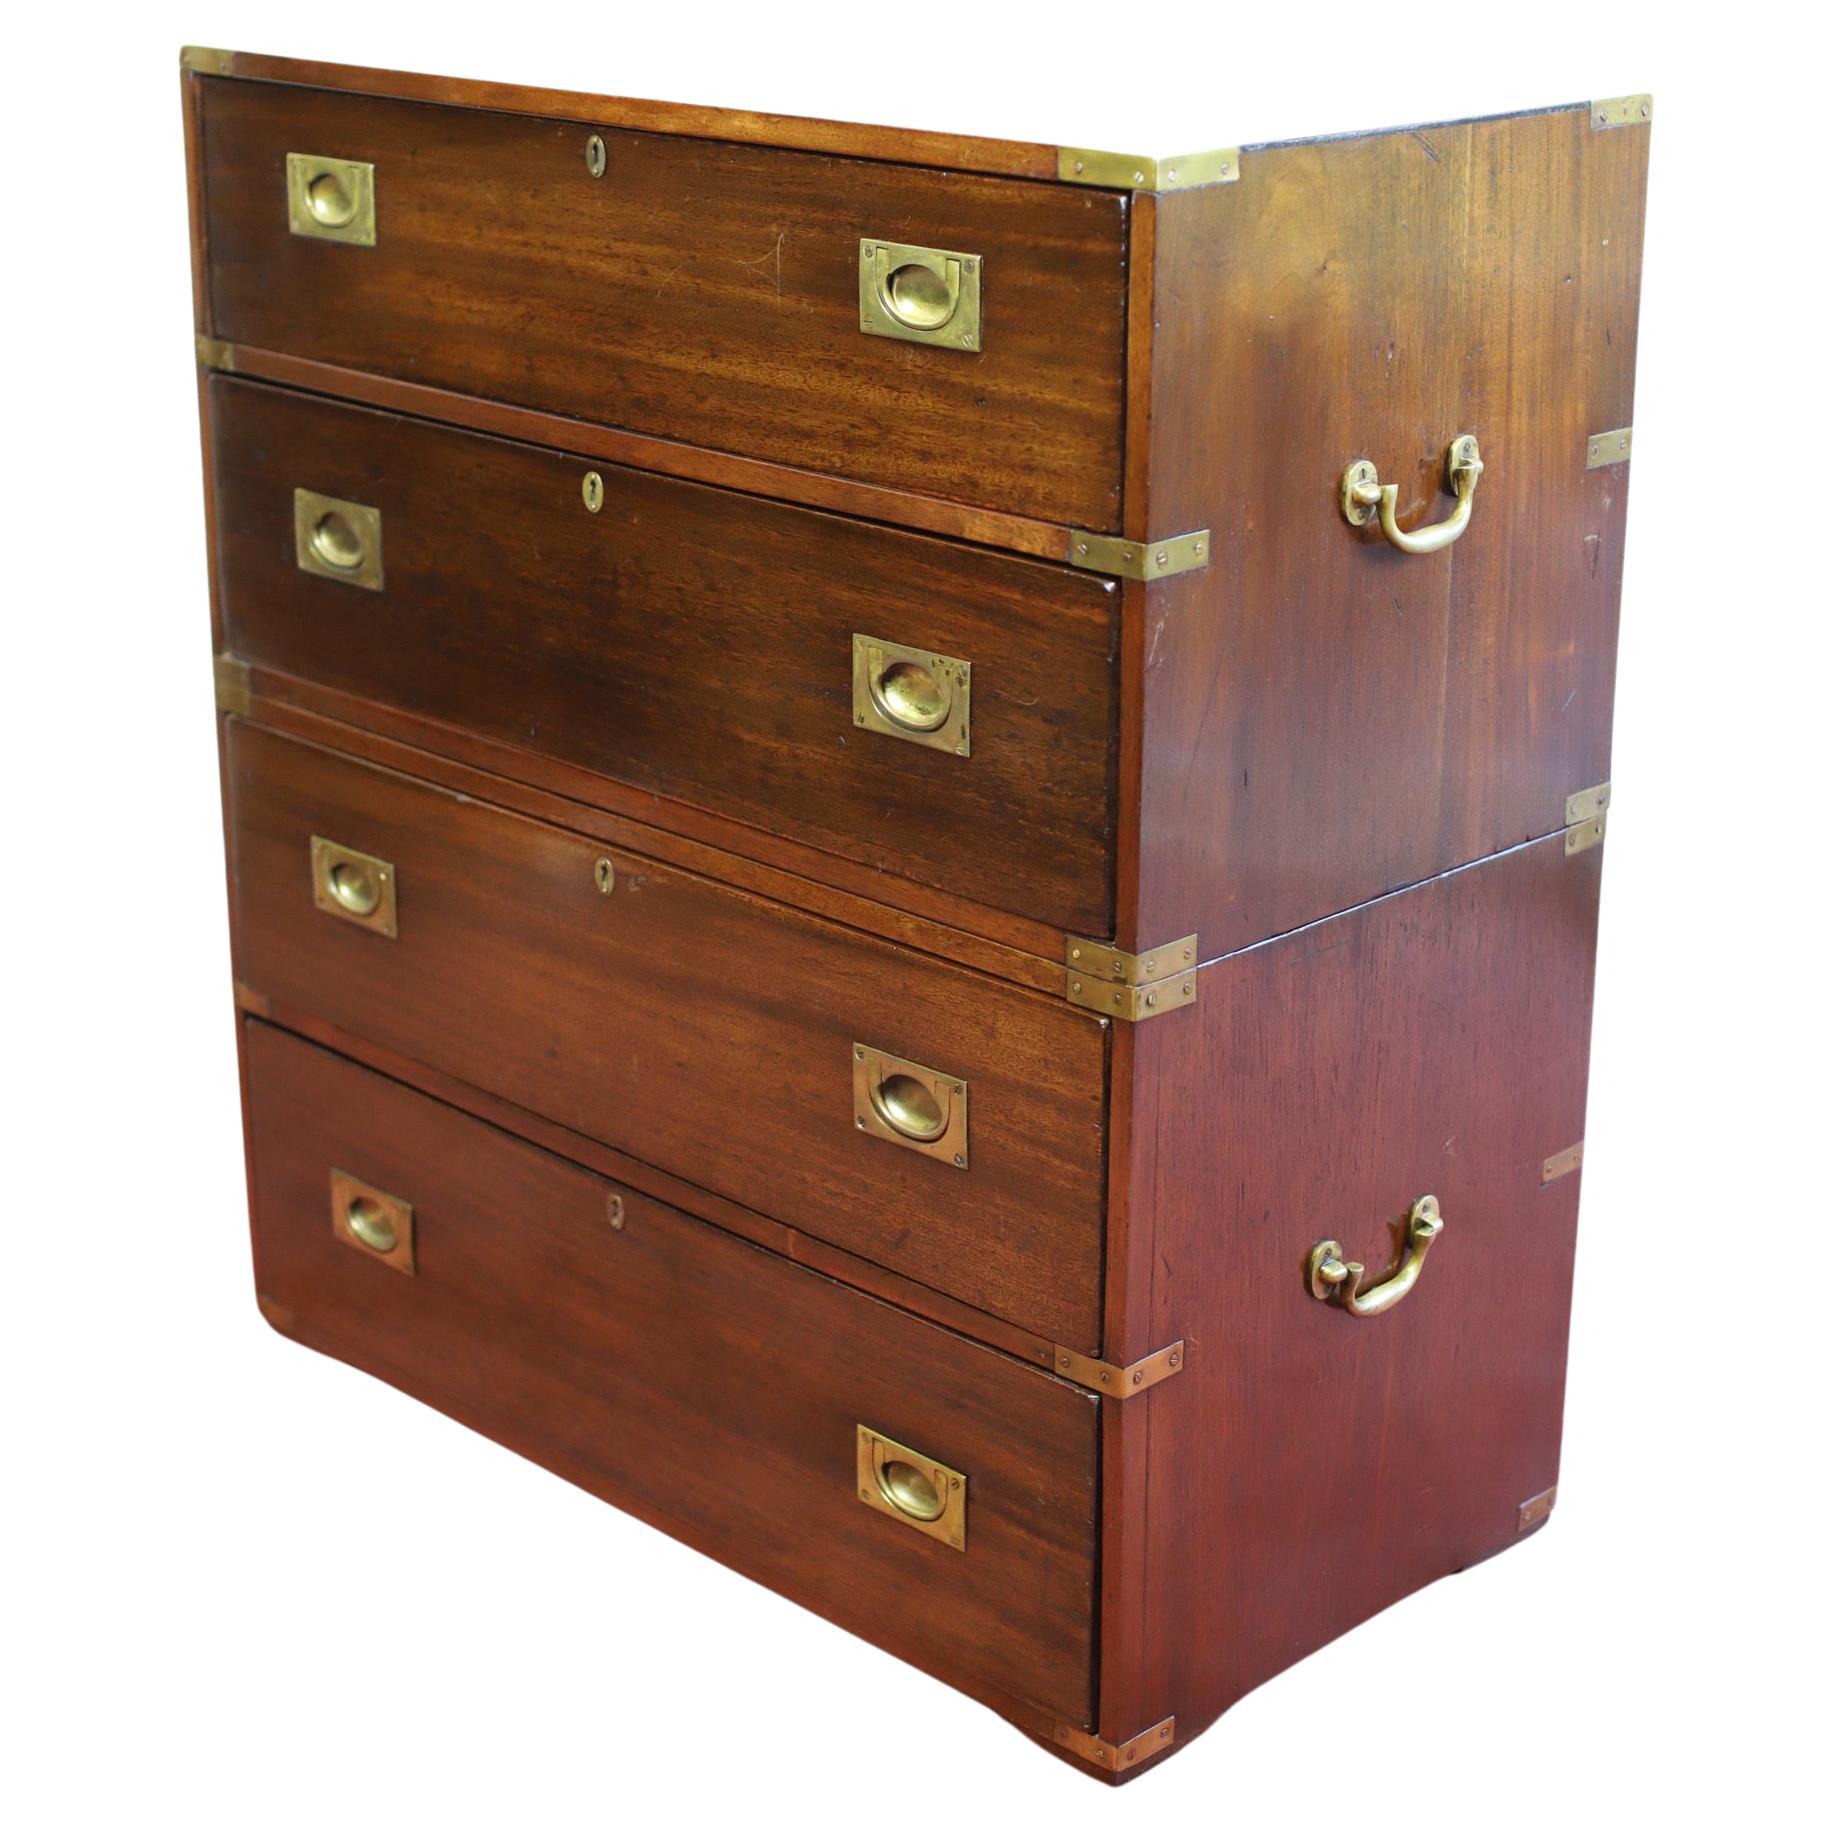 F.Sage&Co London Beautiful English Oak Military Campaign Chest Of Drawers 